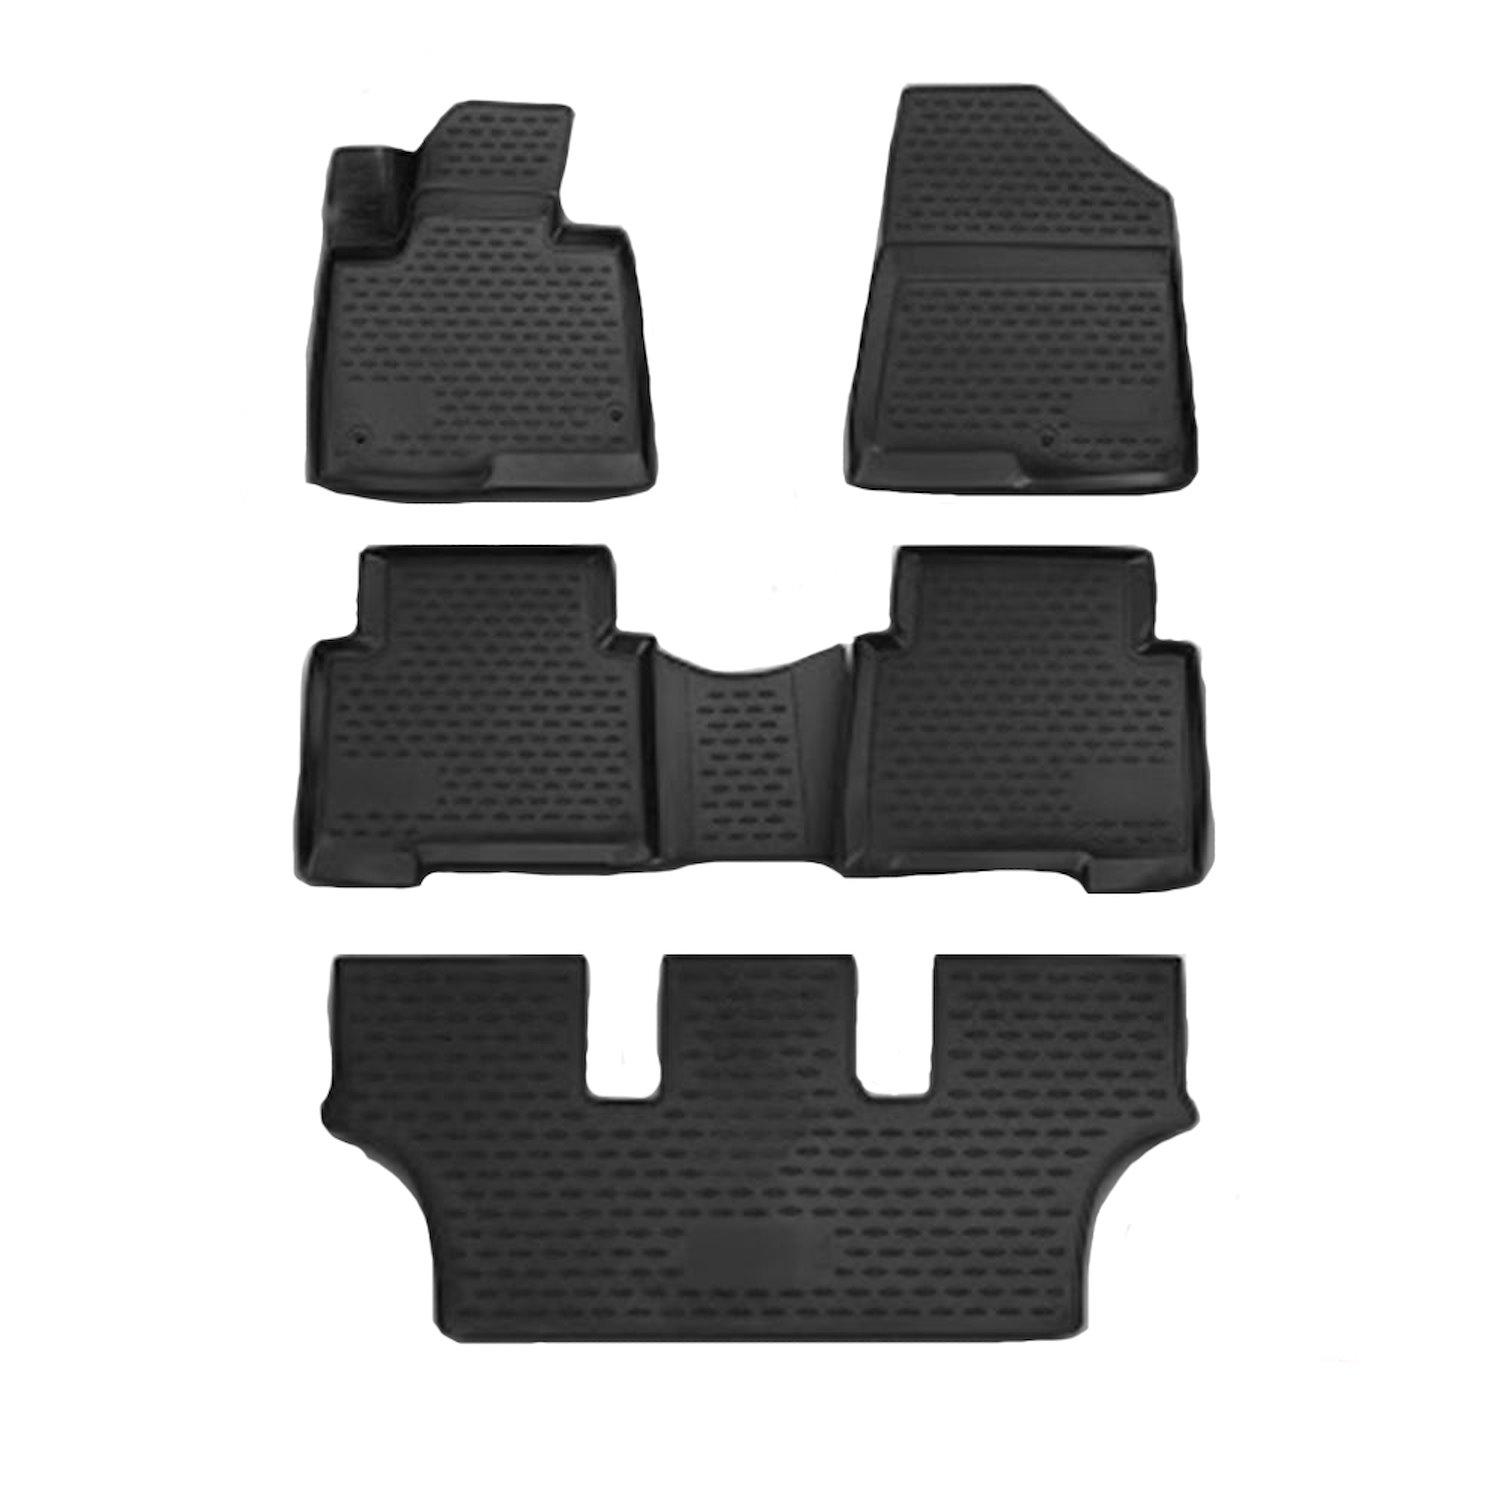 Profile Floor Liners 5 piece for 2013-2017 Hyundai